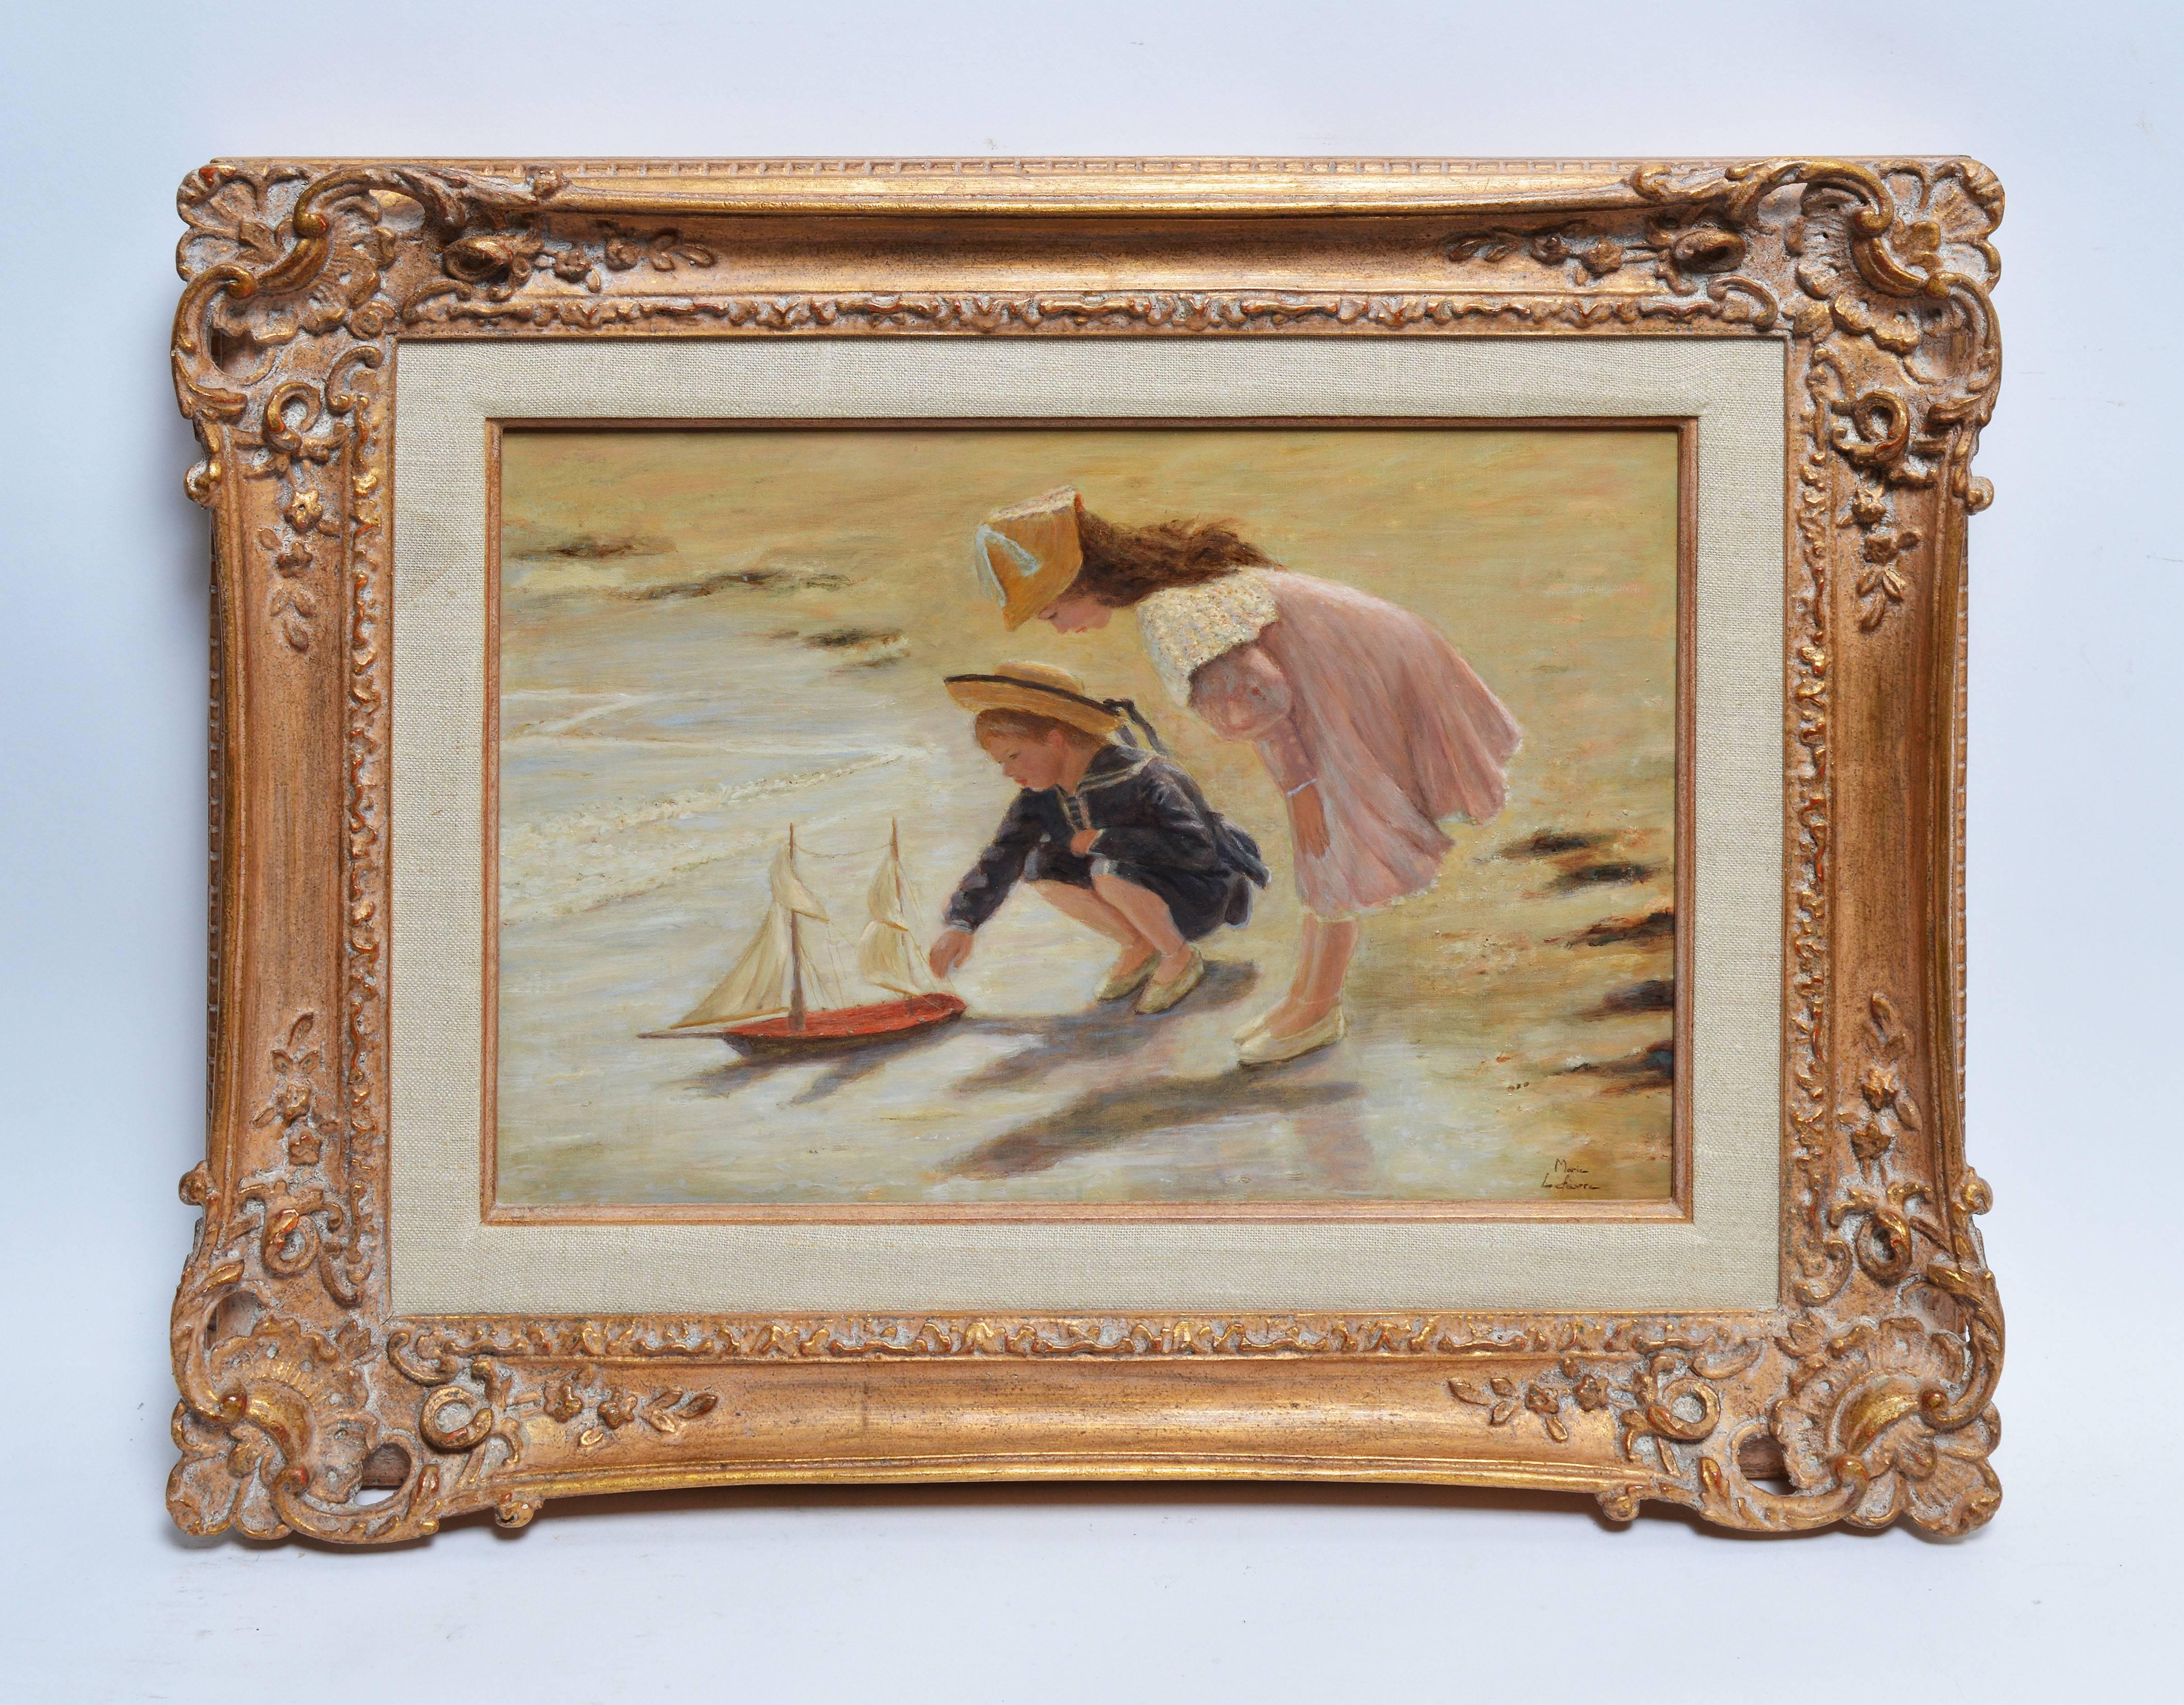 Impressionist painting of children playing with a sailboat by Marie Lefevre.  Oil on canvas, circa 1940.  Signed lower right, "Marie Lefevre".  Displayed in an impressionist frame with a linen liner.  Image size, 14"L x 10"H,